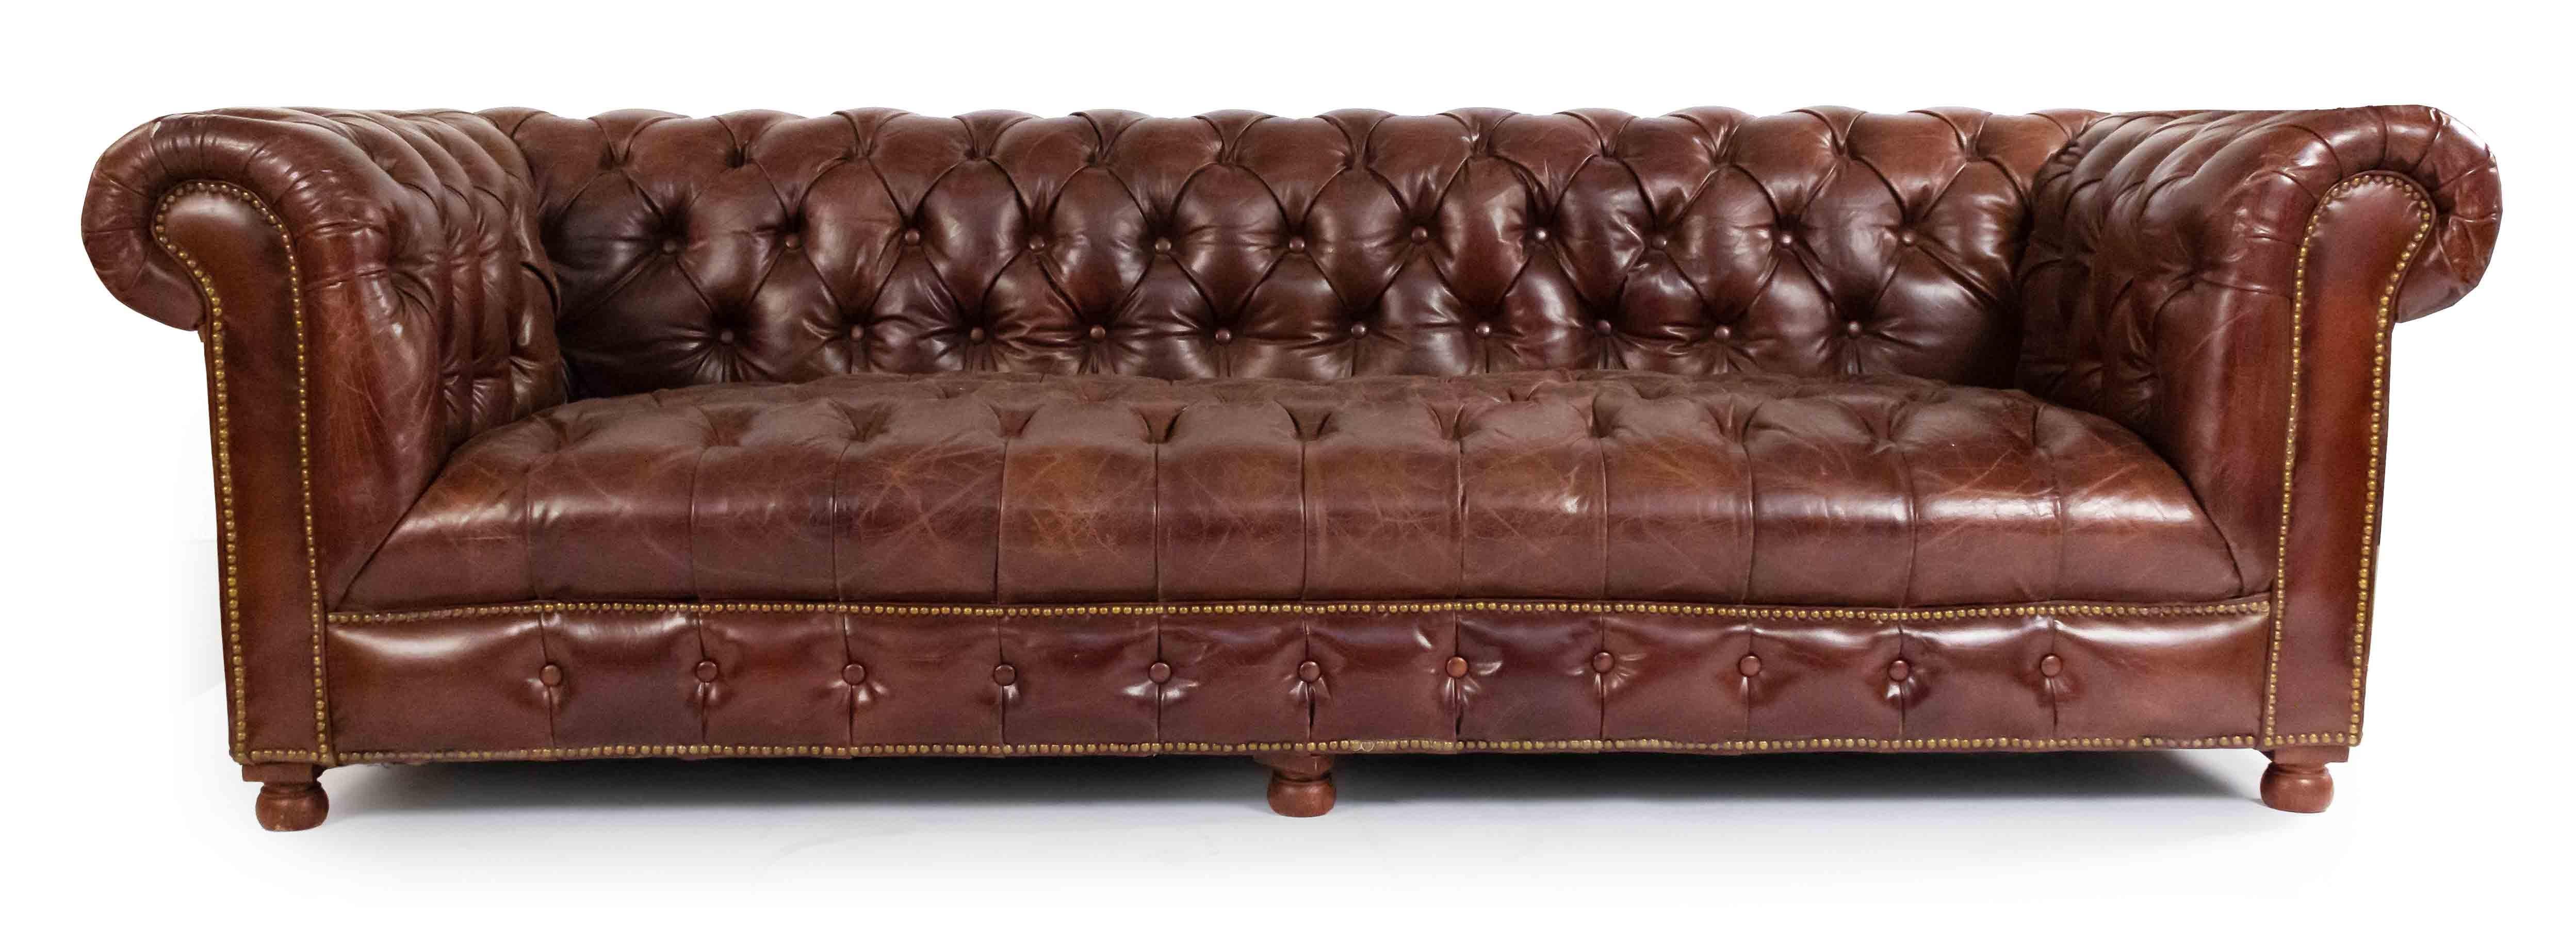 English Victorian style chocolate brown tufted leather Chesterfield sofa with distressed finish and out-scrolled arms on four wooden bun feet. Brass rivets along trim.